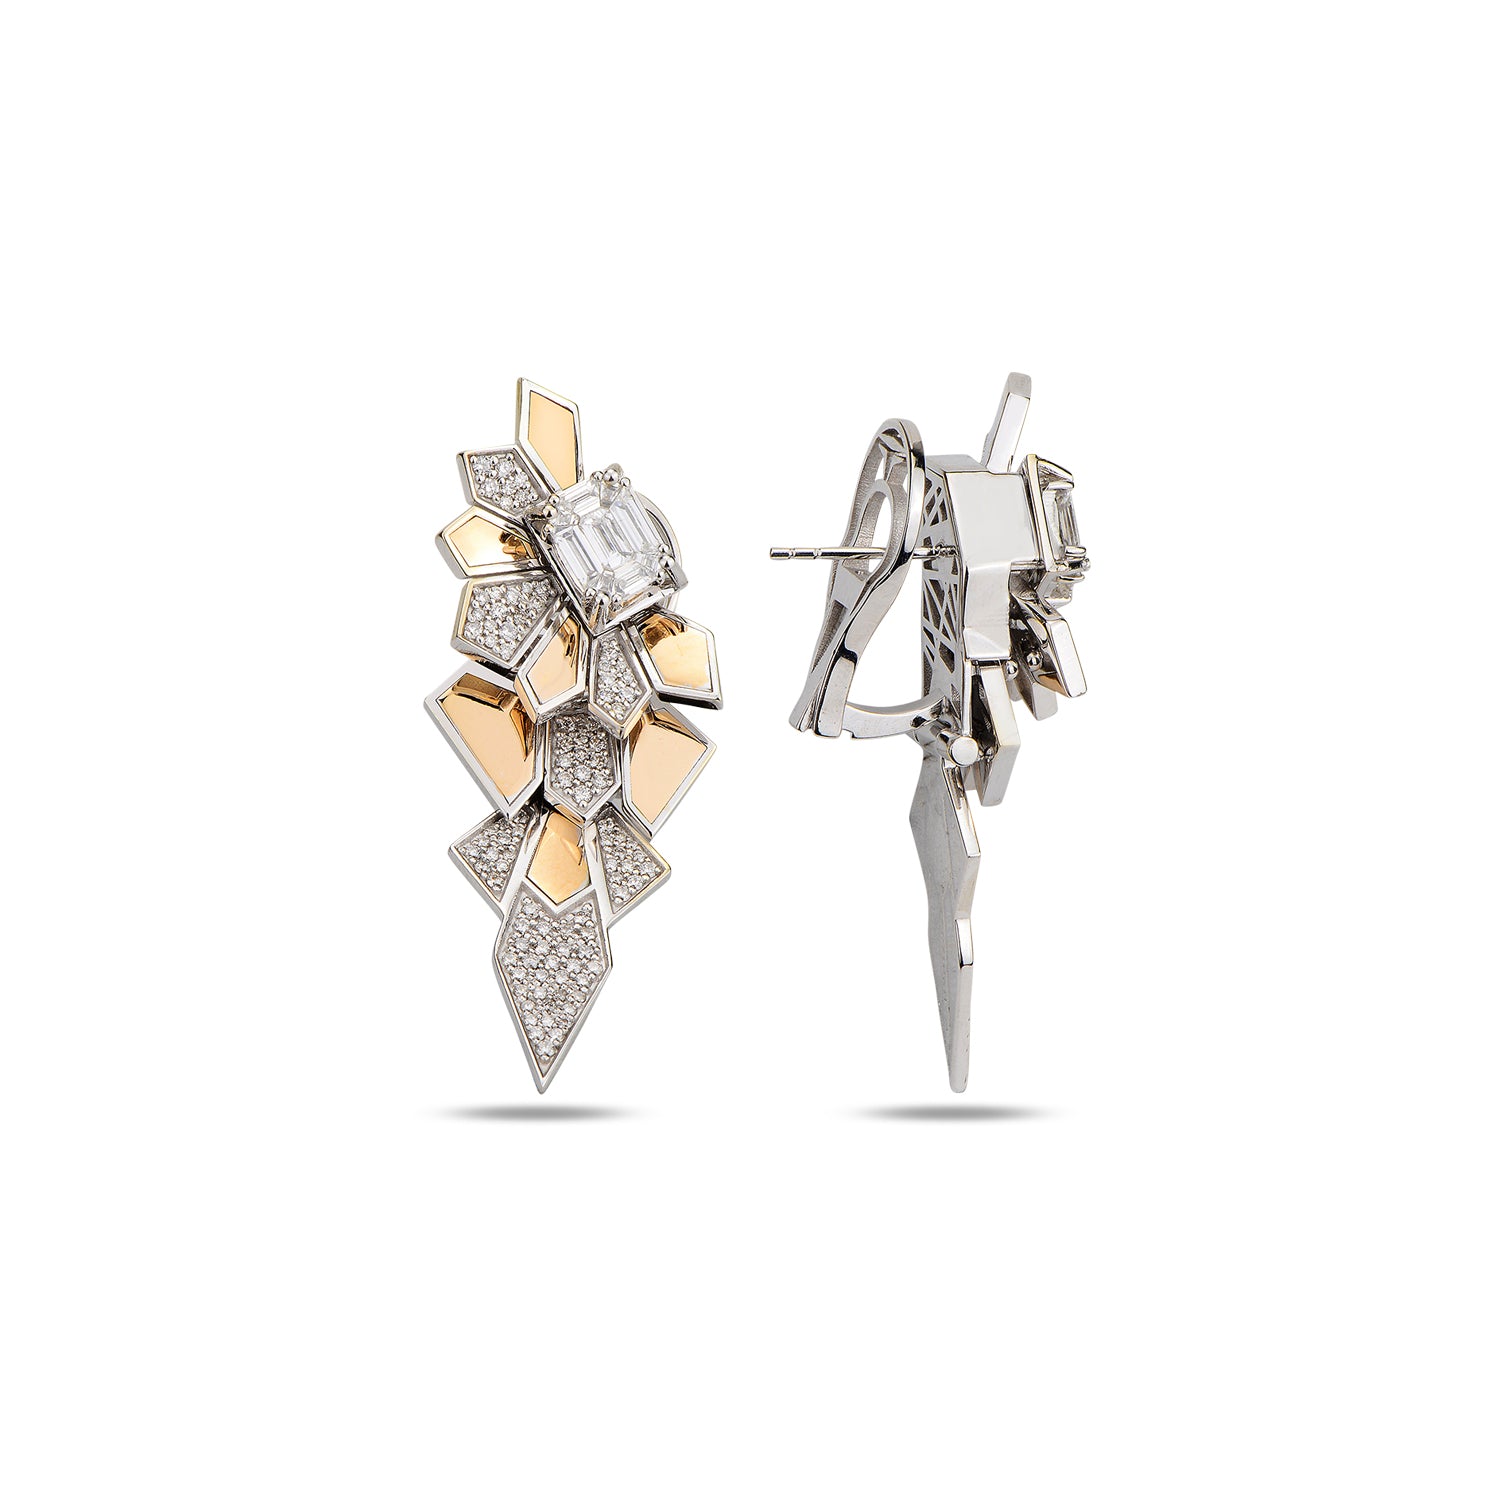 Alis Crush Limited Edition Earrings